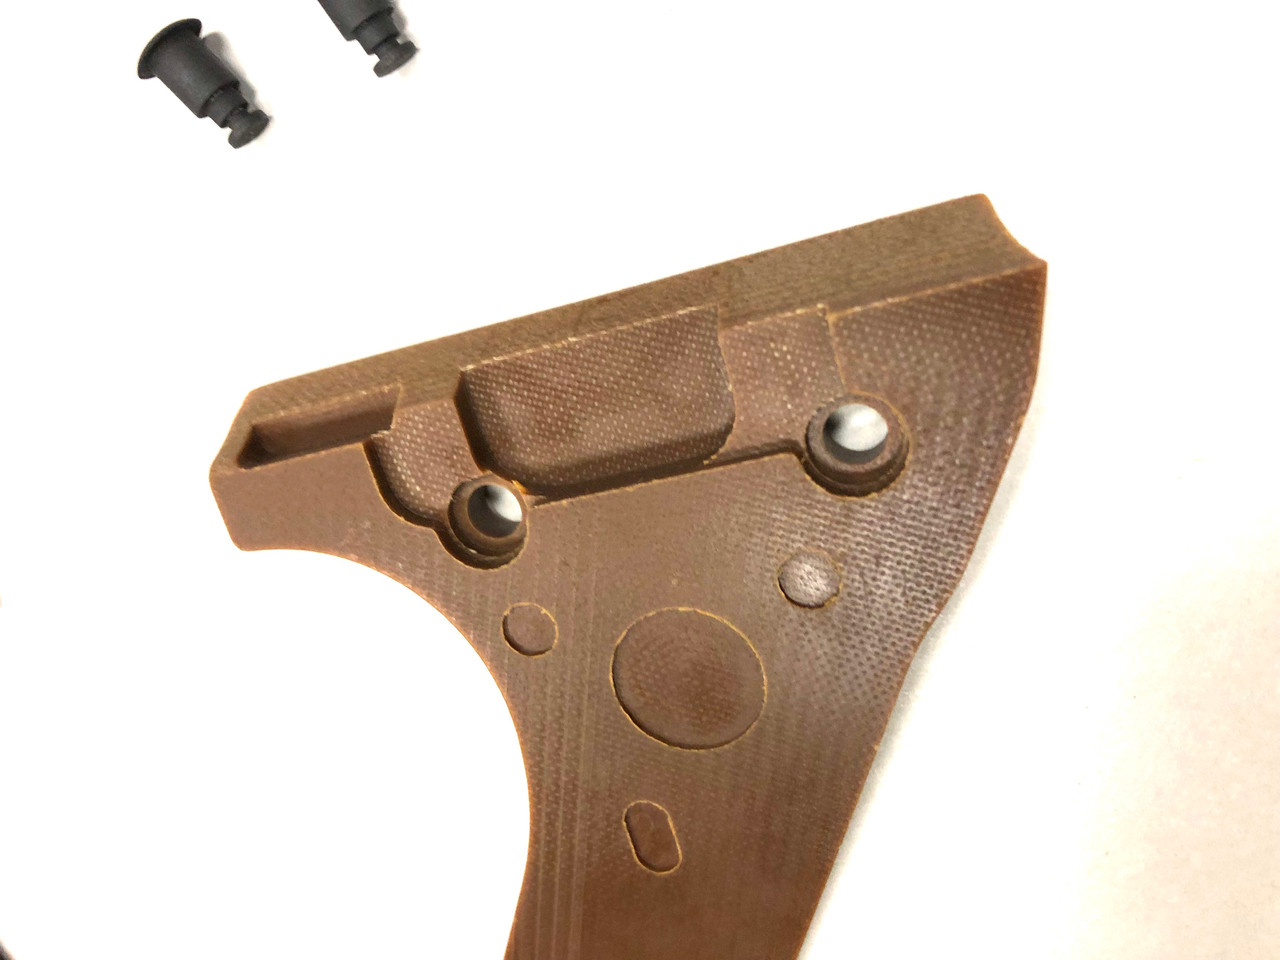 MG34 G10 Grip Set with Mounting Hardware (BROWN)